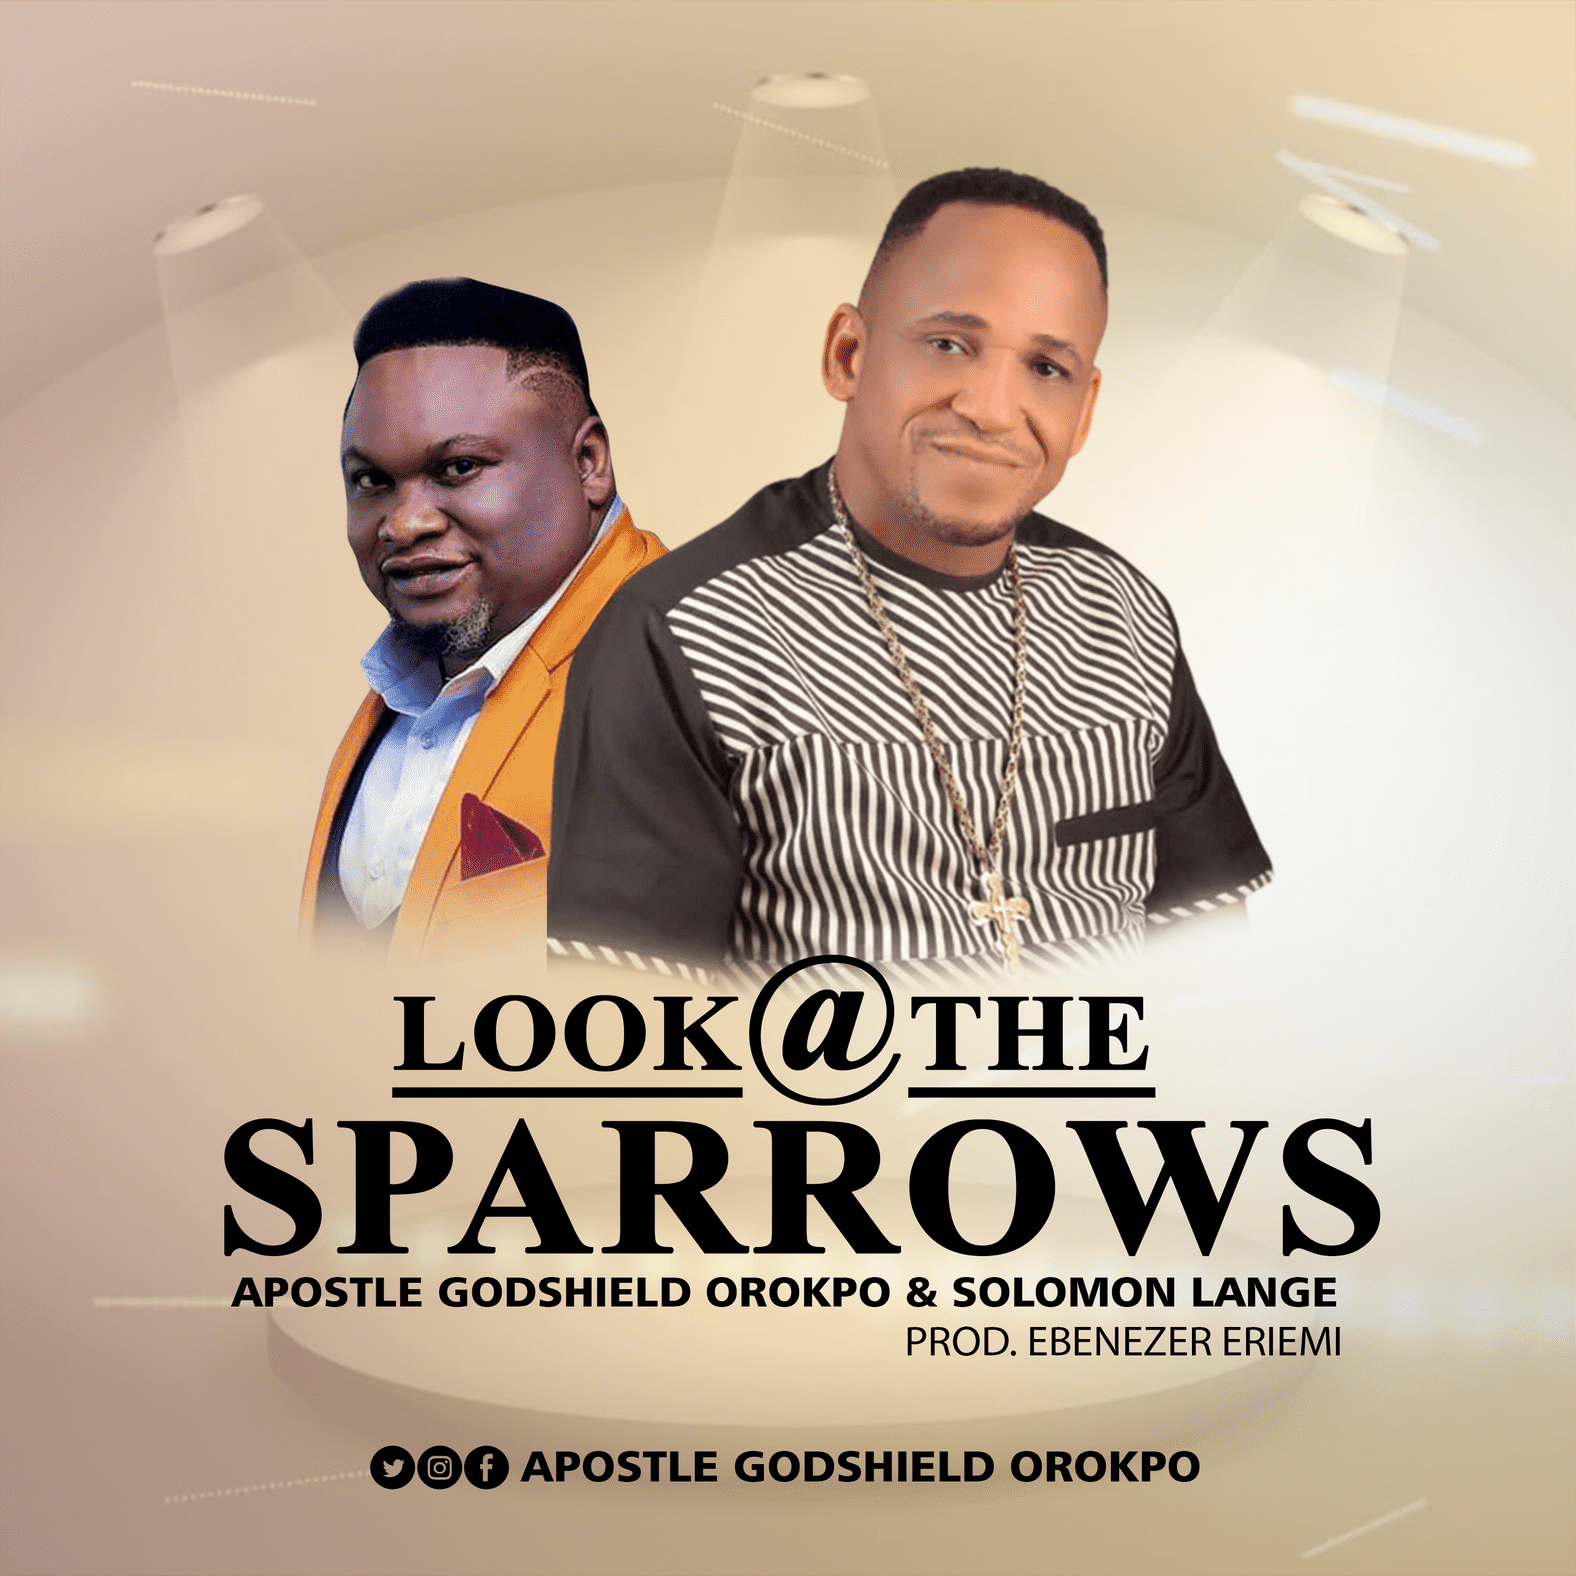 Download Mp3: Apostle Godshield Orokpo - Look At the Sparrows Ft. Solomon Lange